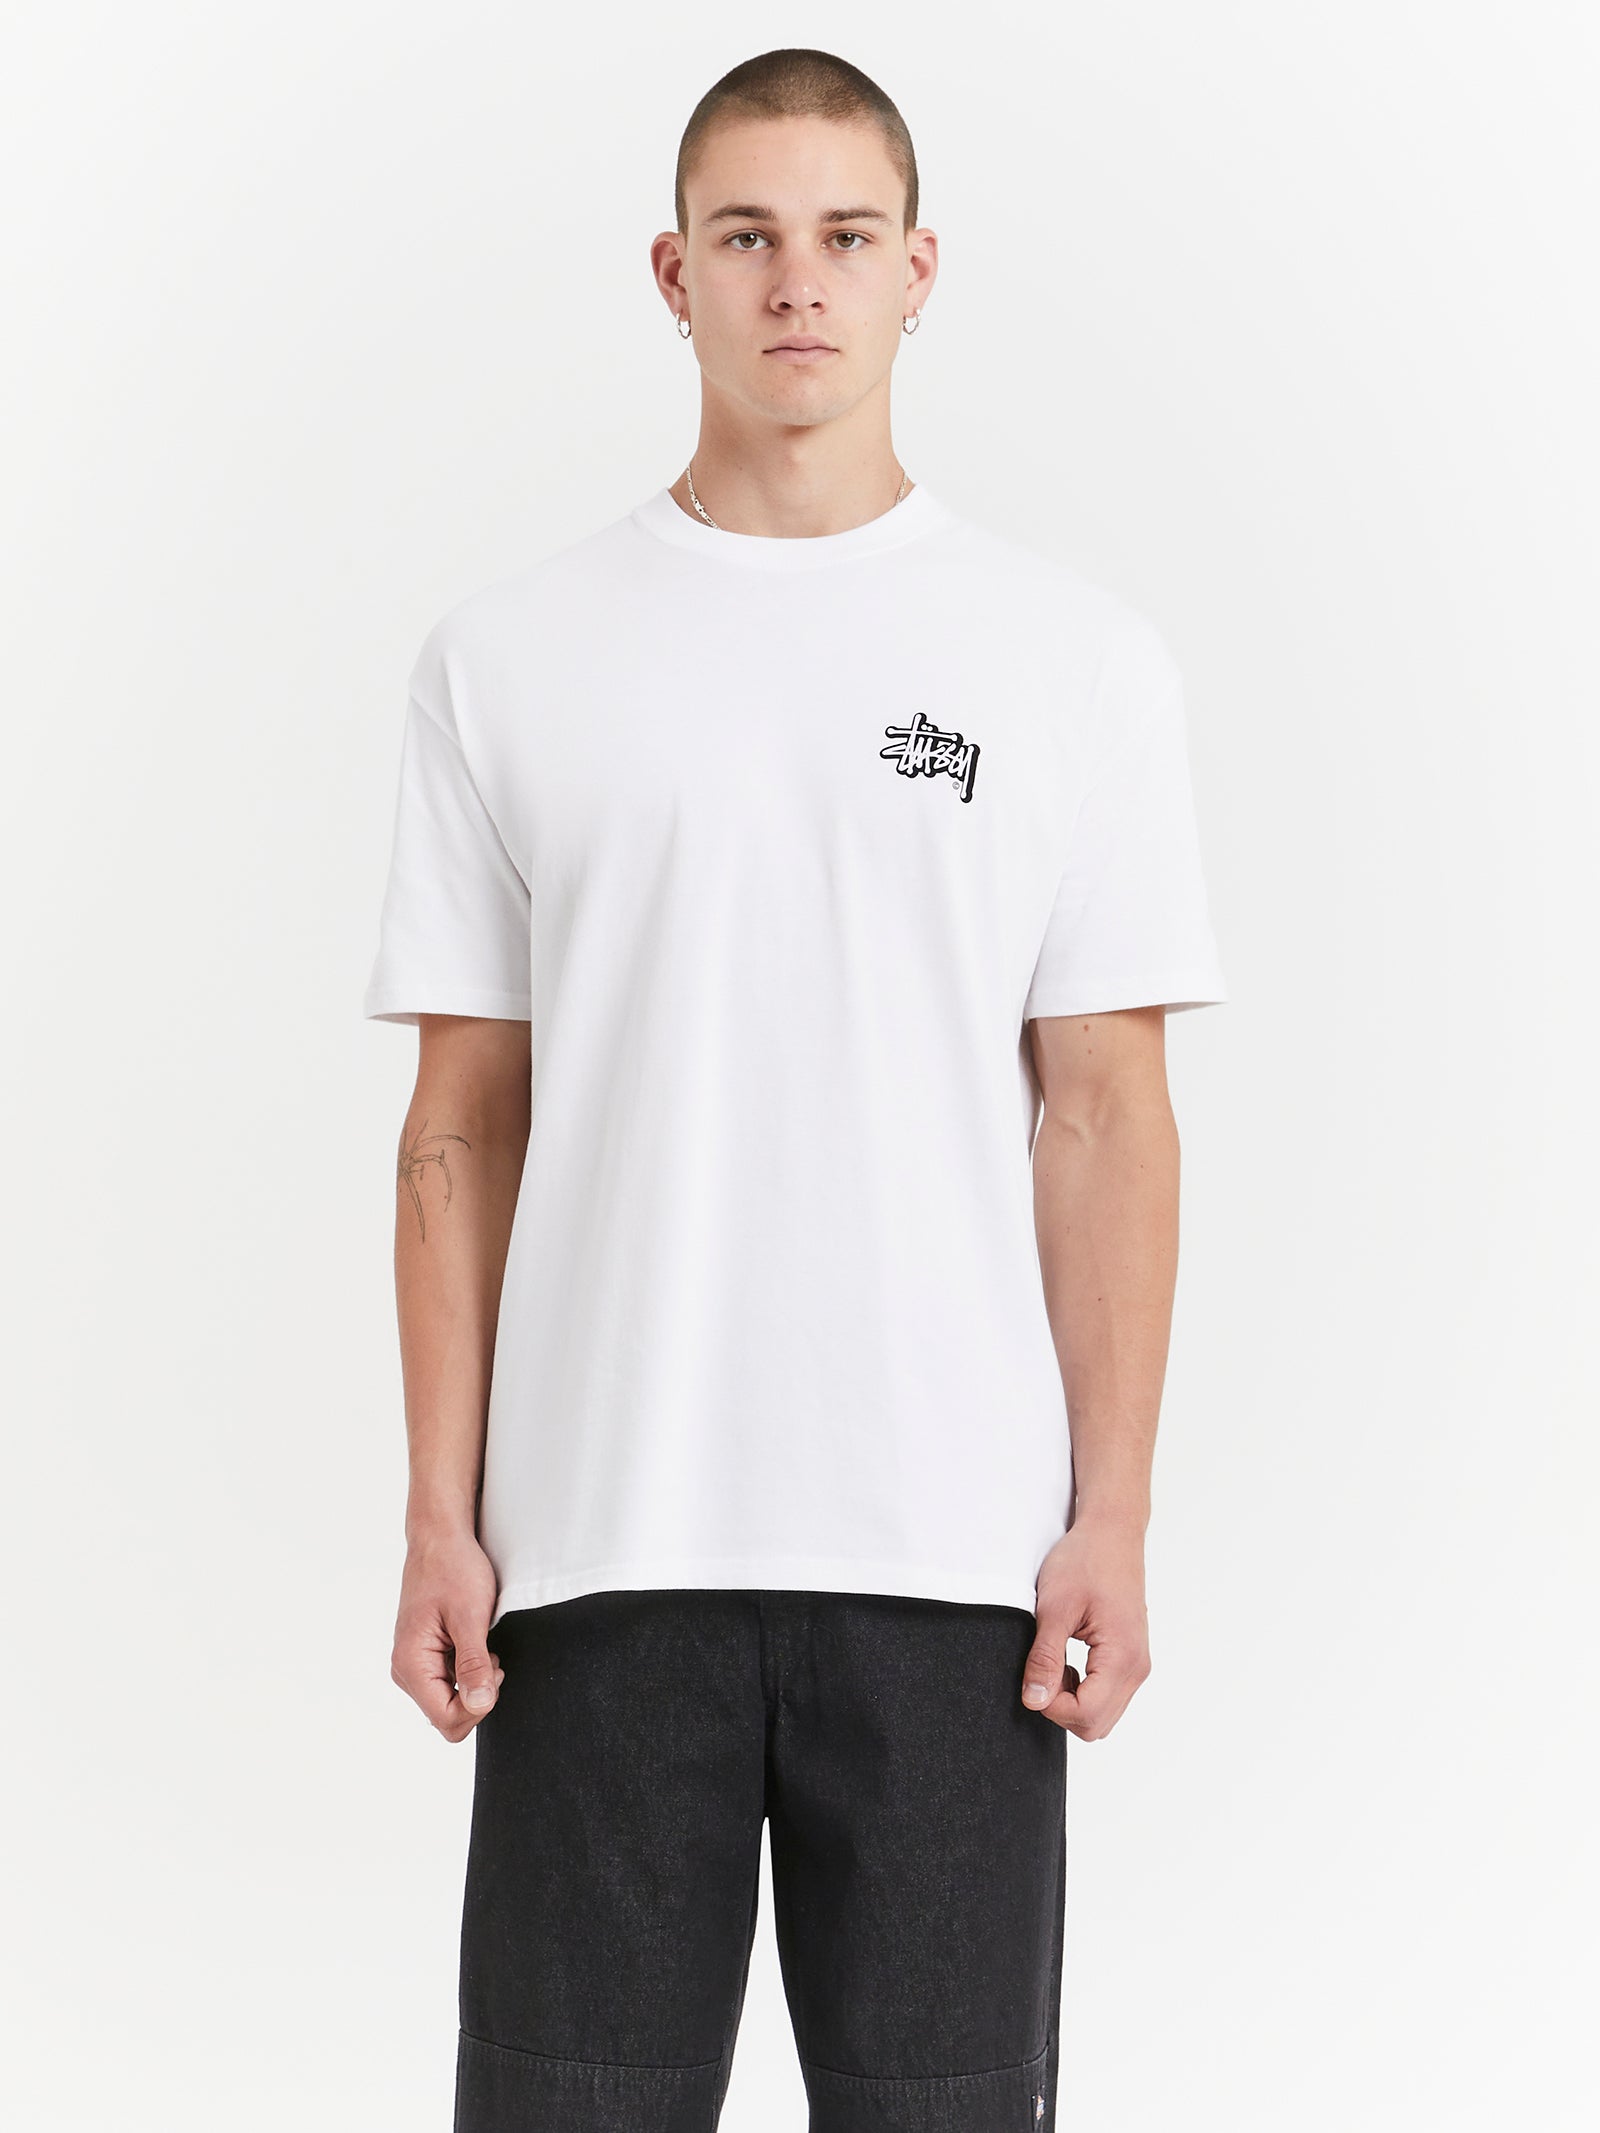 Solid Offset Graffiti Heavyweight T-Shirt in White - Glue Store